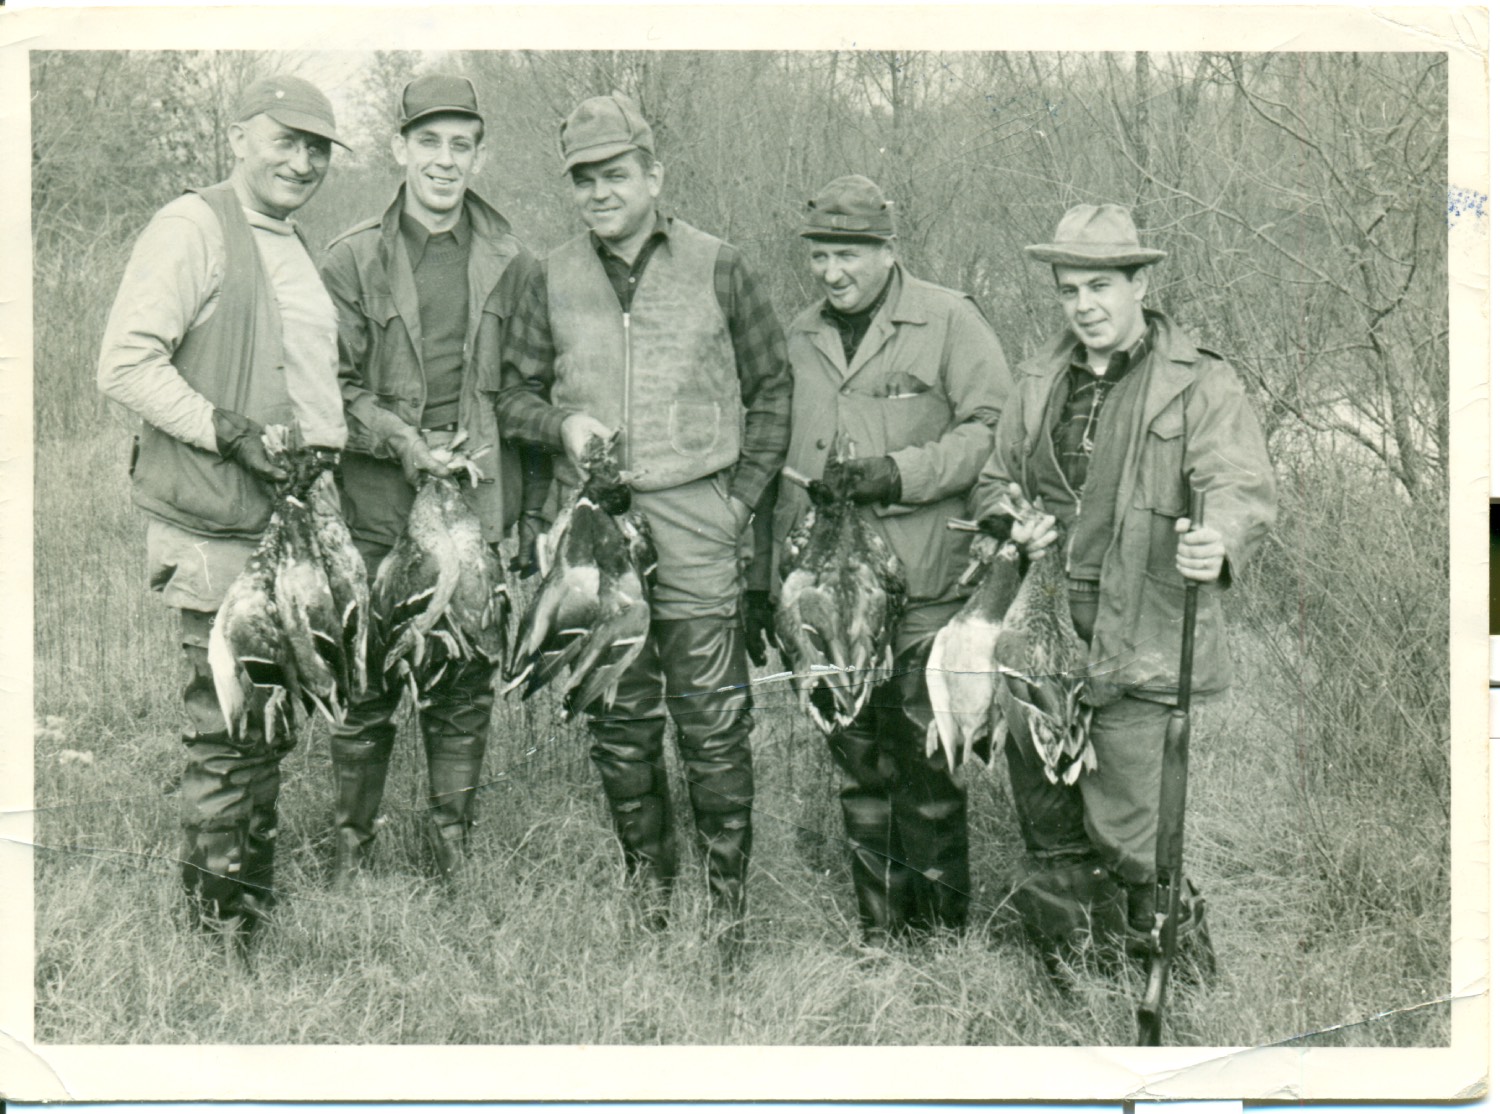 old photo of five men holding up ducks, circa 40s